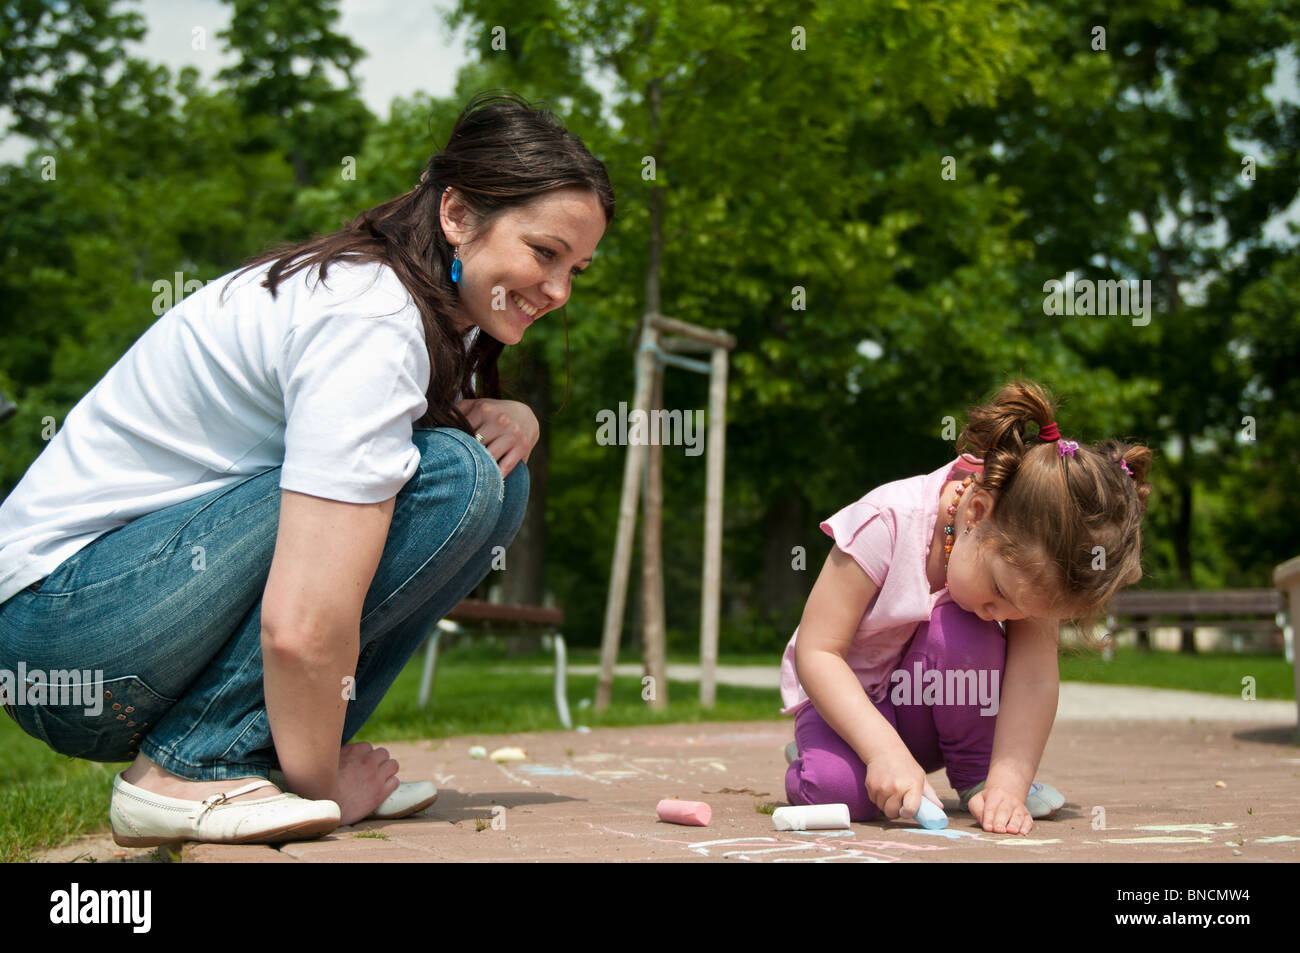 A child has used drawing chaulk to creat art on a playground Stock Photo -  Alamy